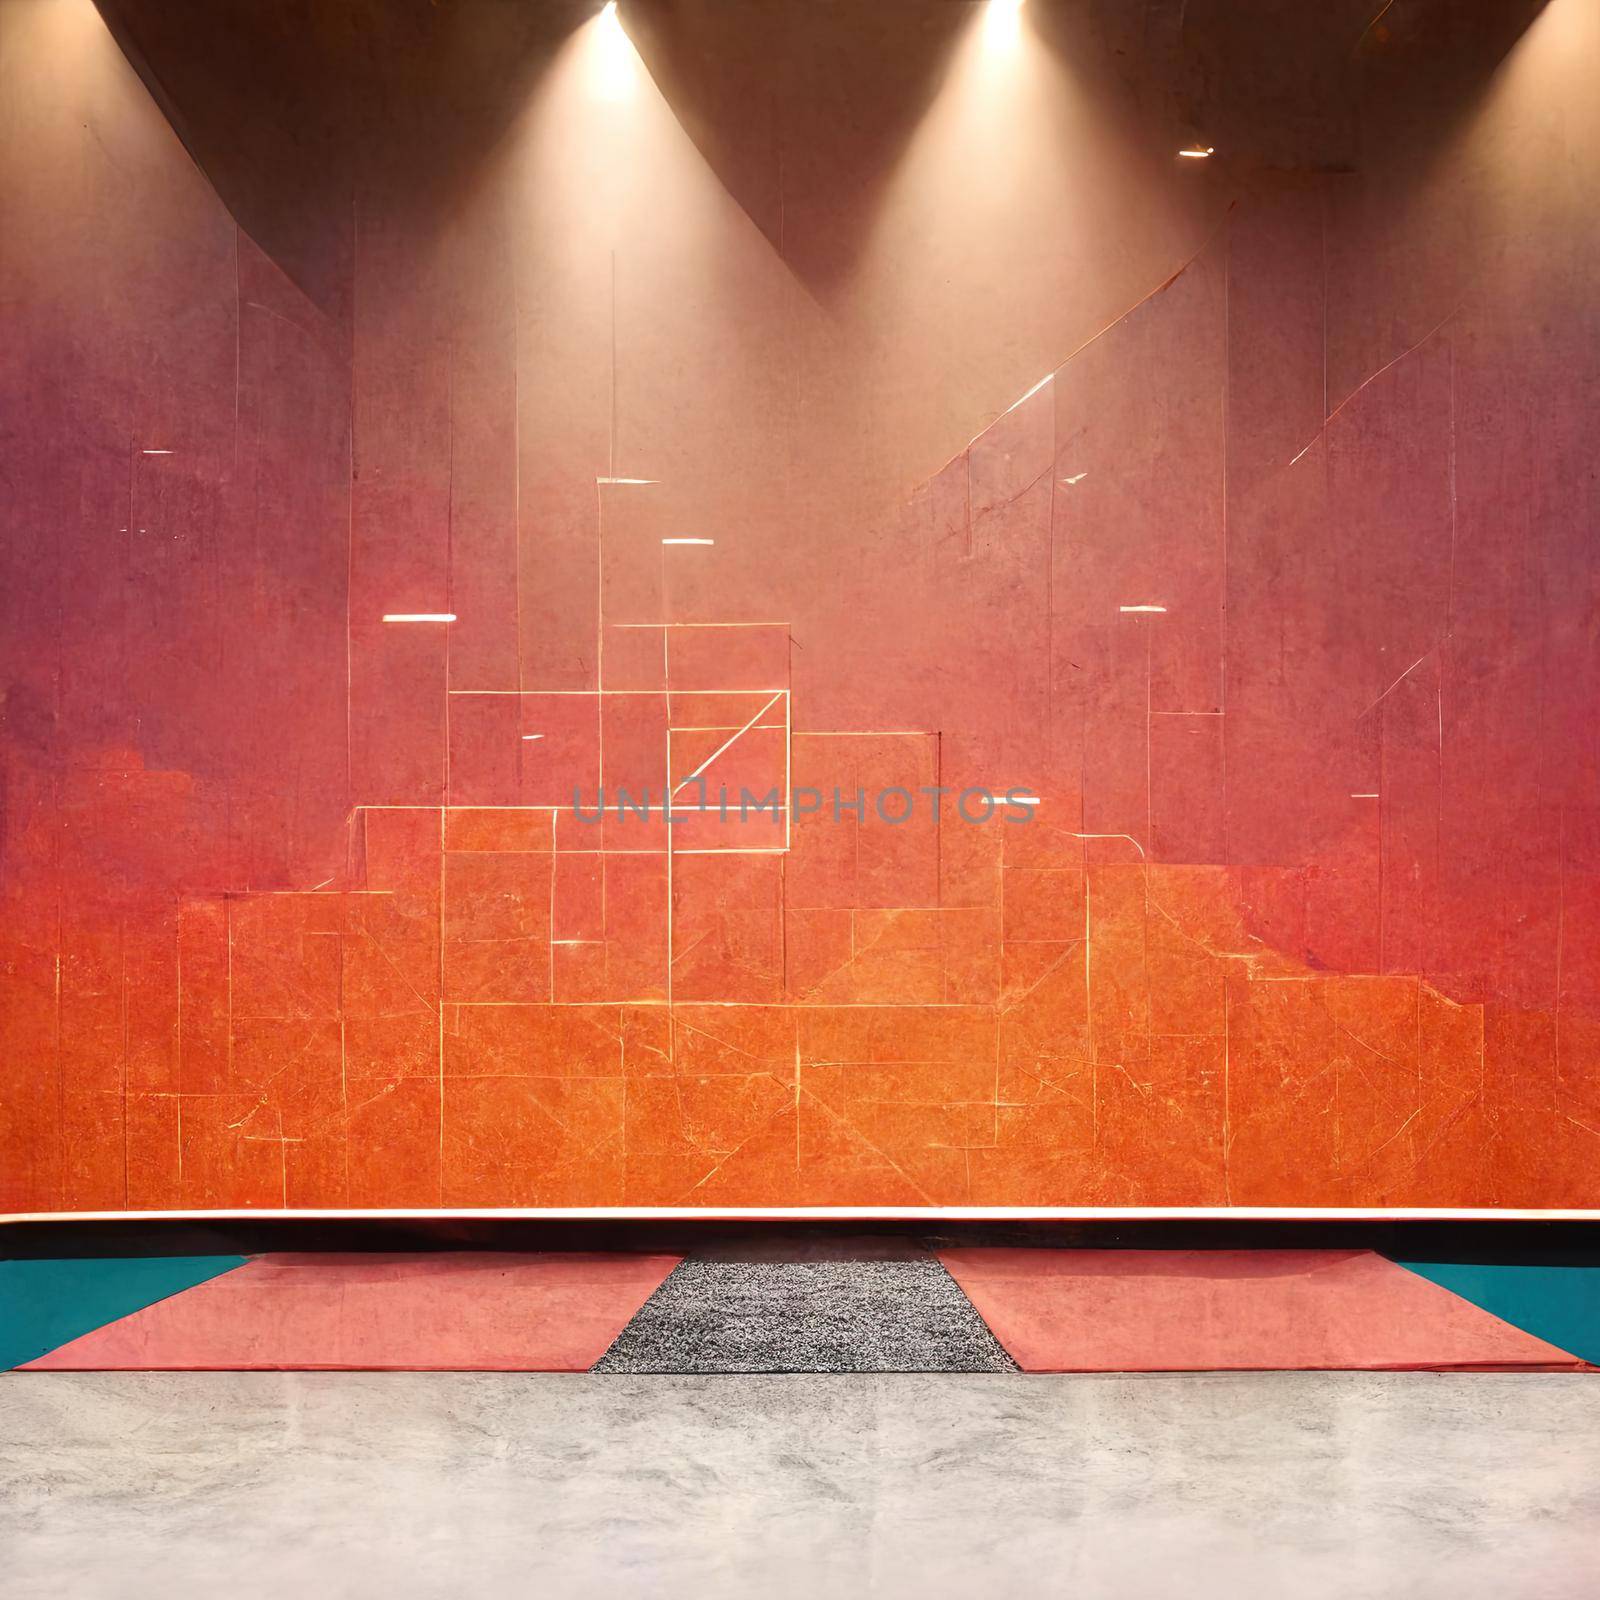 studio with geometric shapes, podium on the floor by 2ragon